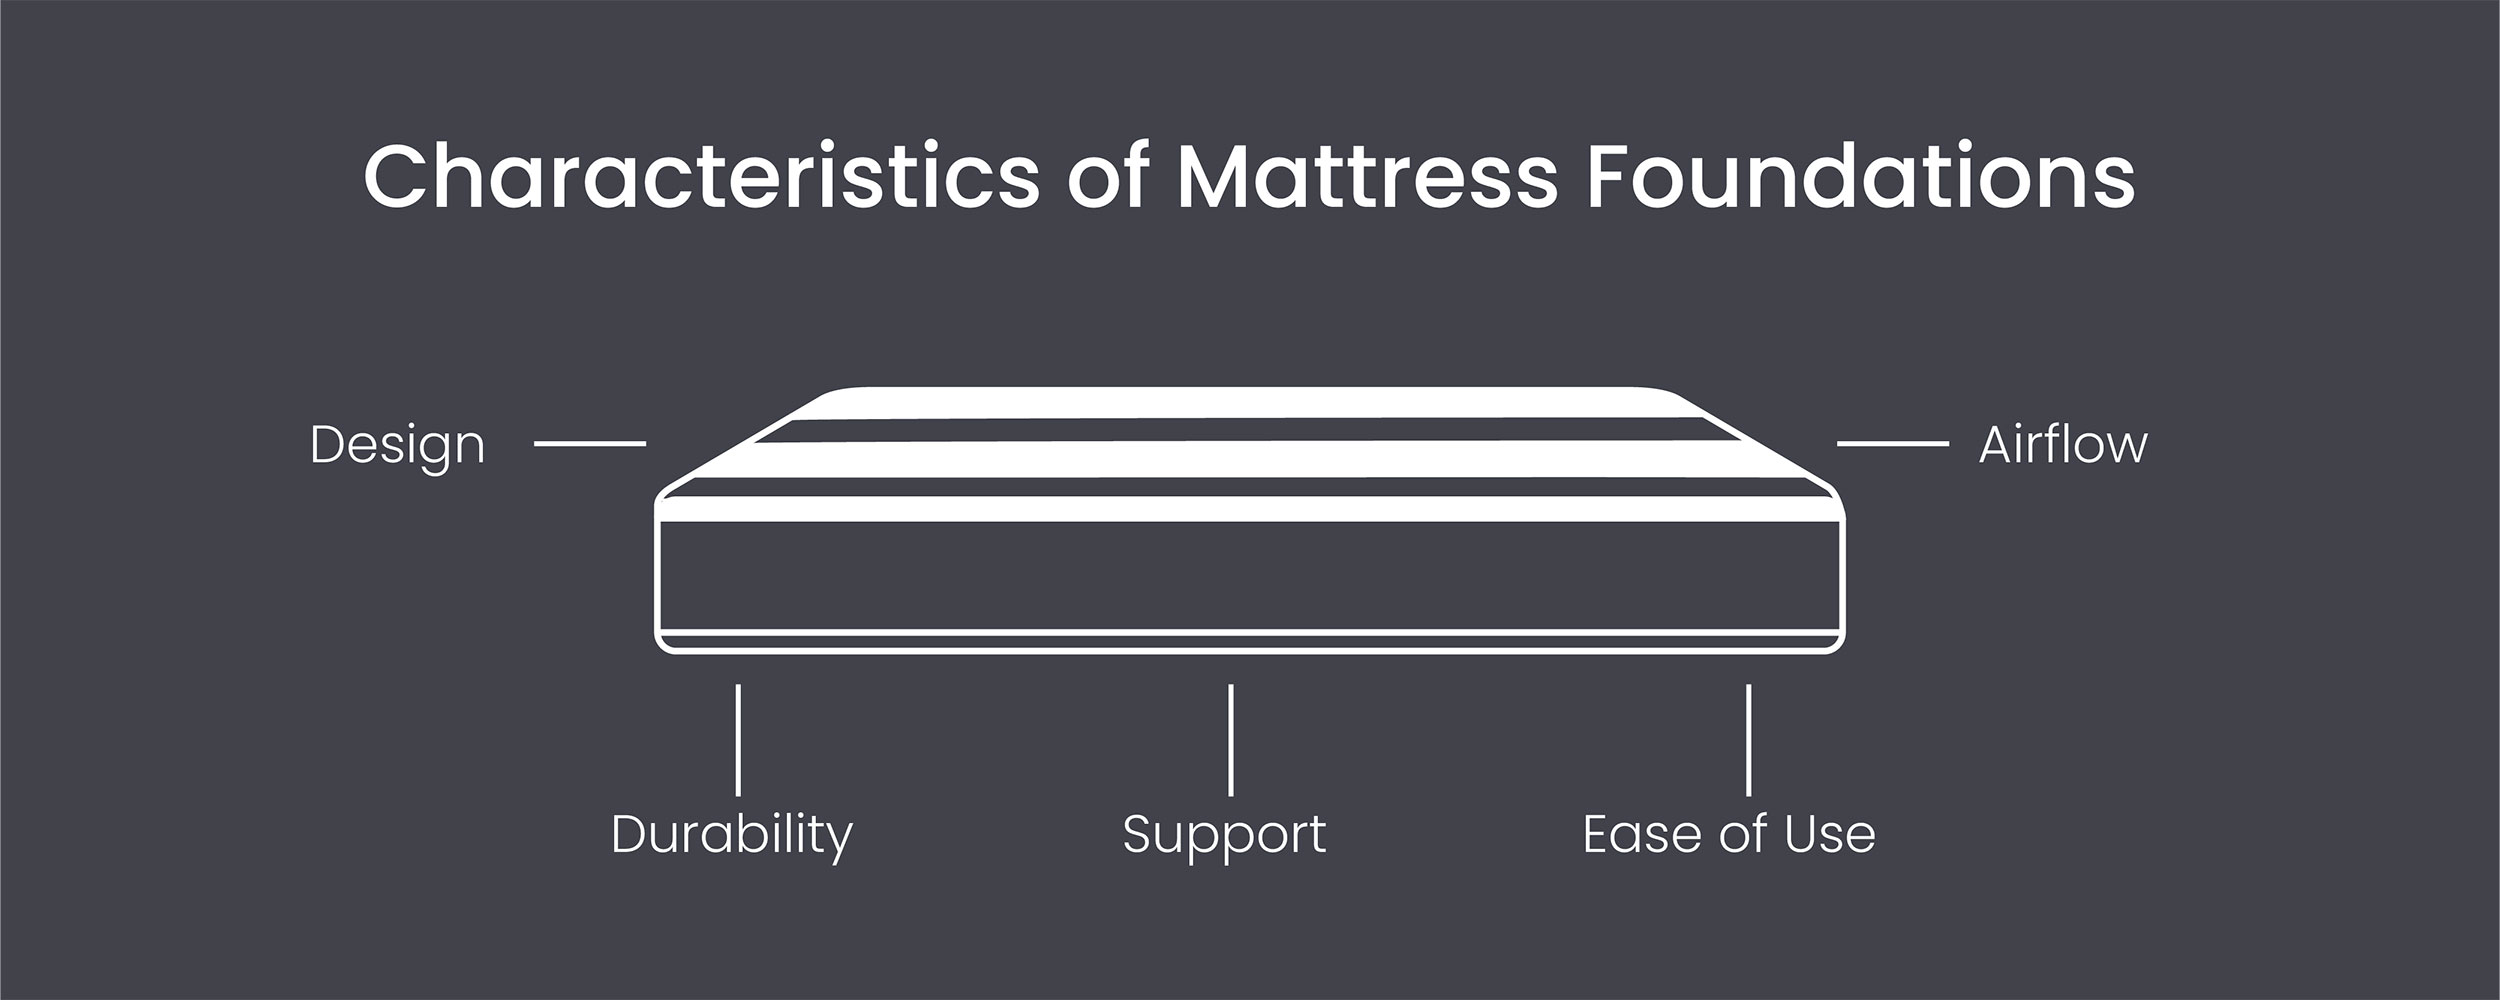 Characteristics of mattress foundations you should consider include its design, durability, support, ease of use, and airflow.